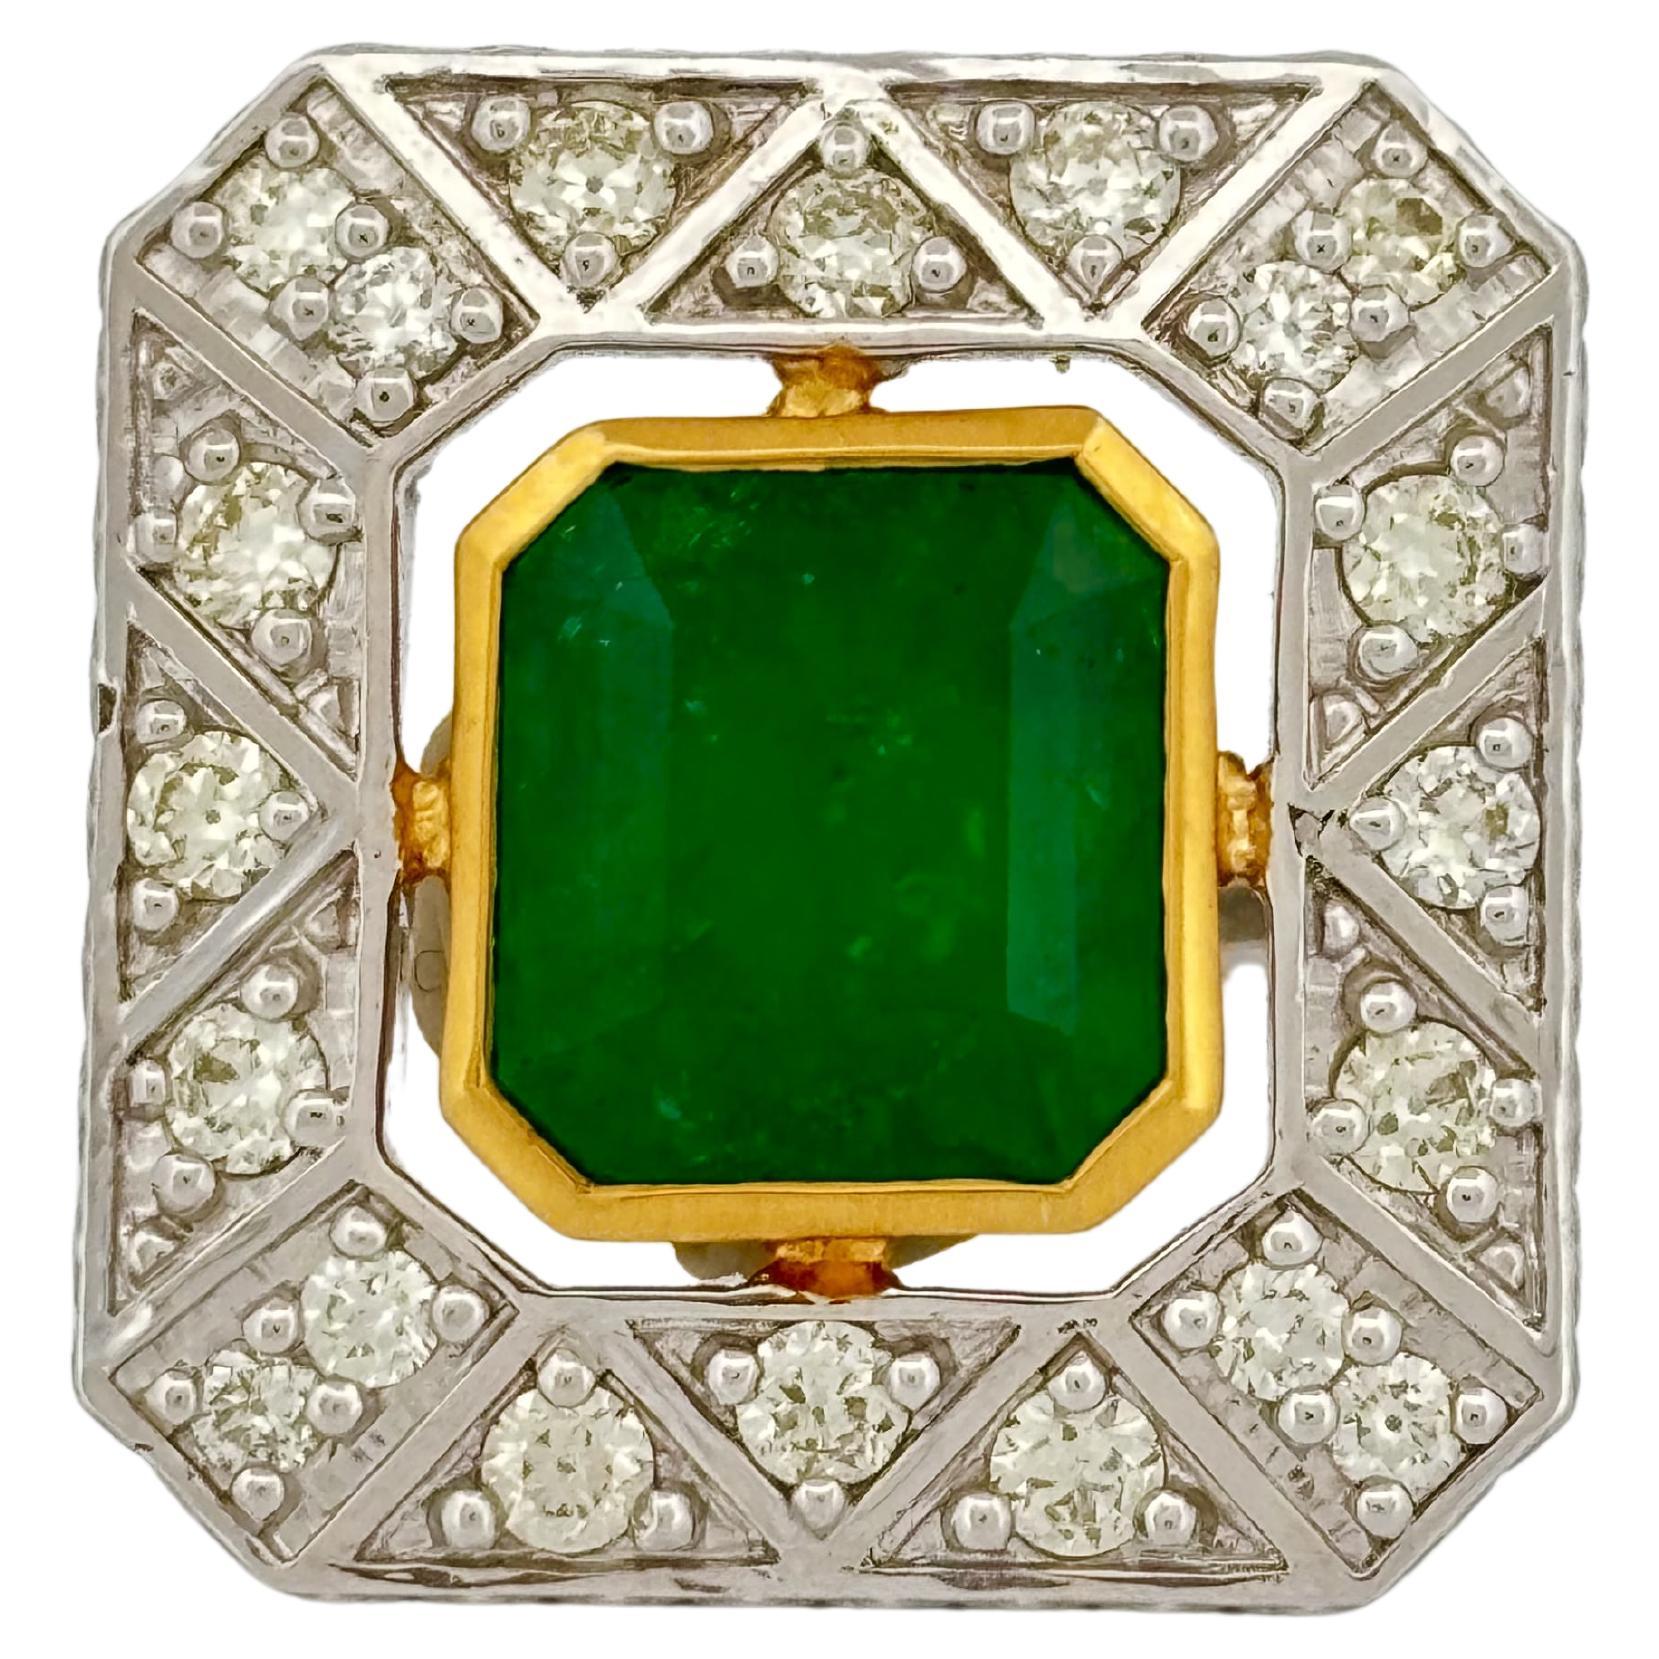 5.22 ct Colombian Emerald Art Deco Ring with Old Cut Diamonds in 18K Gold